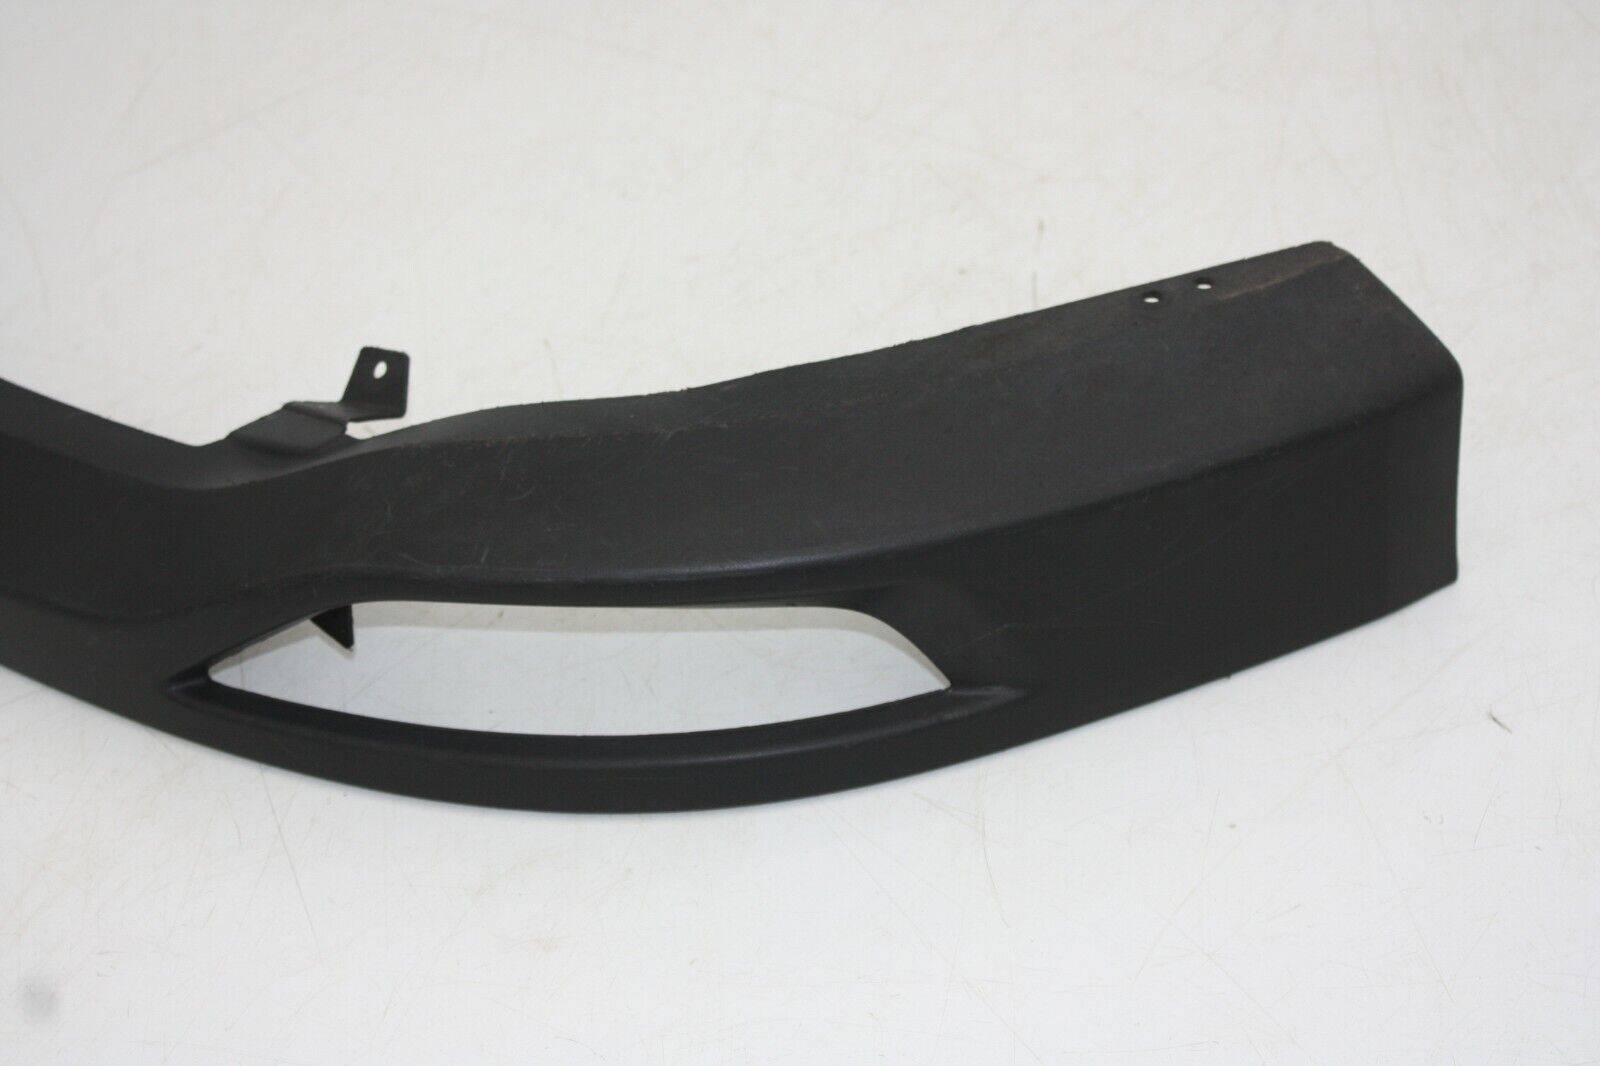 Ford-C-Max-Rear-Bumper-Lower-Section-2010-TO-2015-AM51-R17A894-A-Genuine-175367537489-2